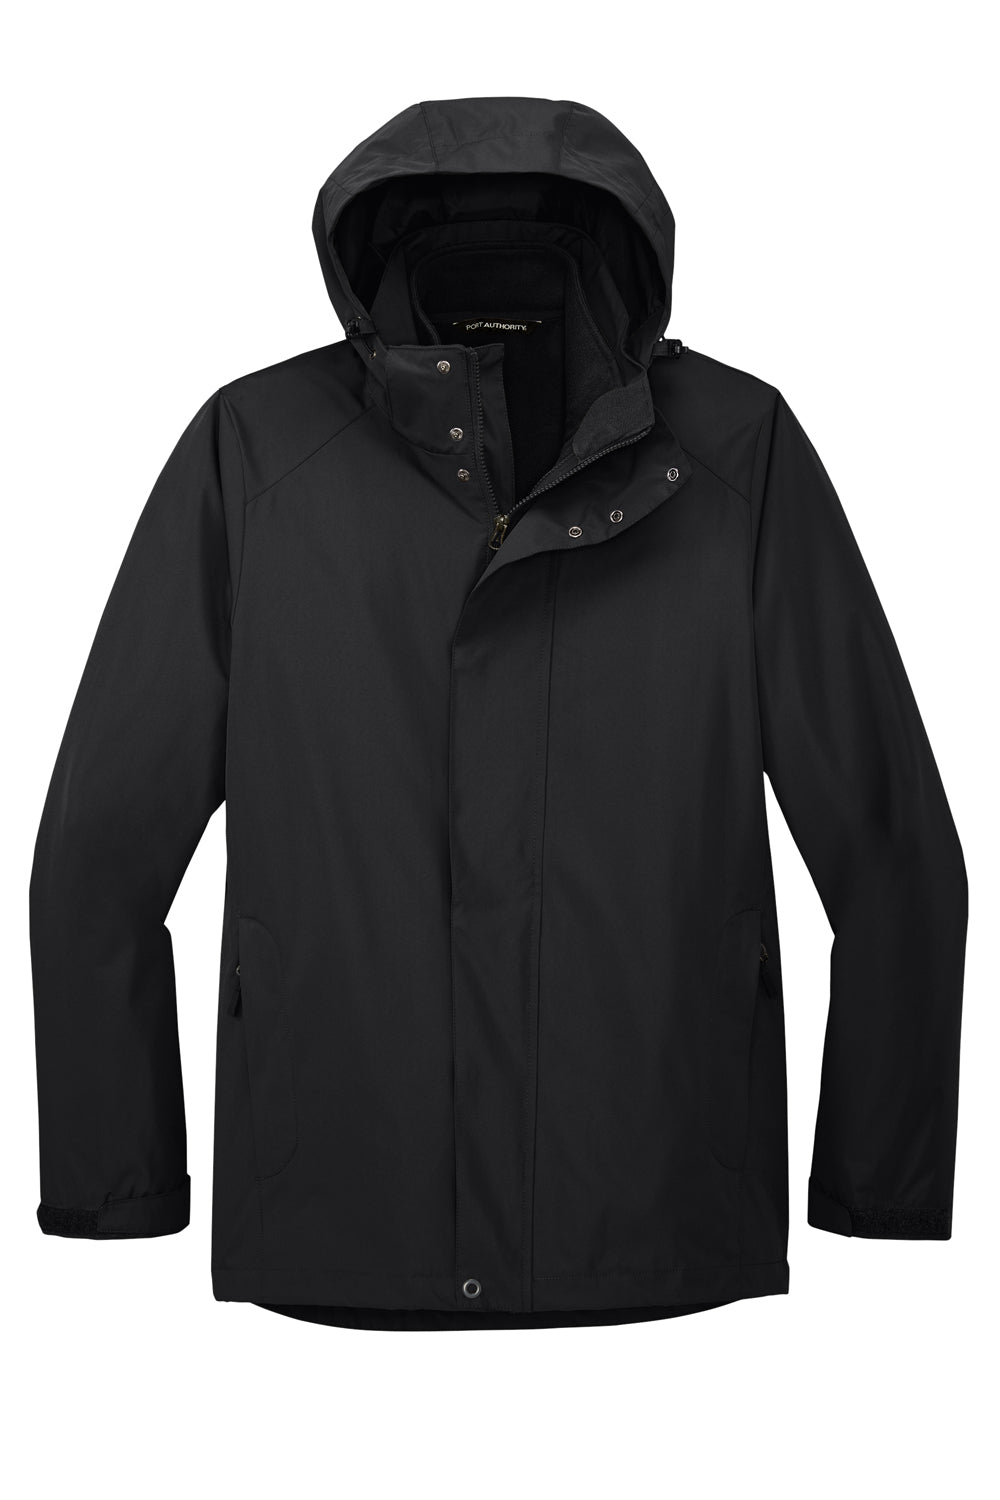 Port Authority J123 Mens All Weather 3 in 1 Full Zip Hooded Jacket Black Flat Front